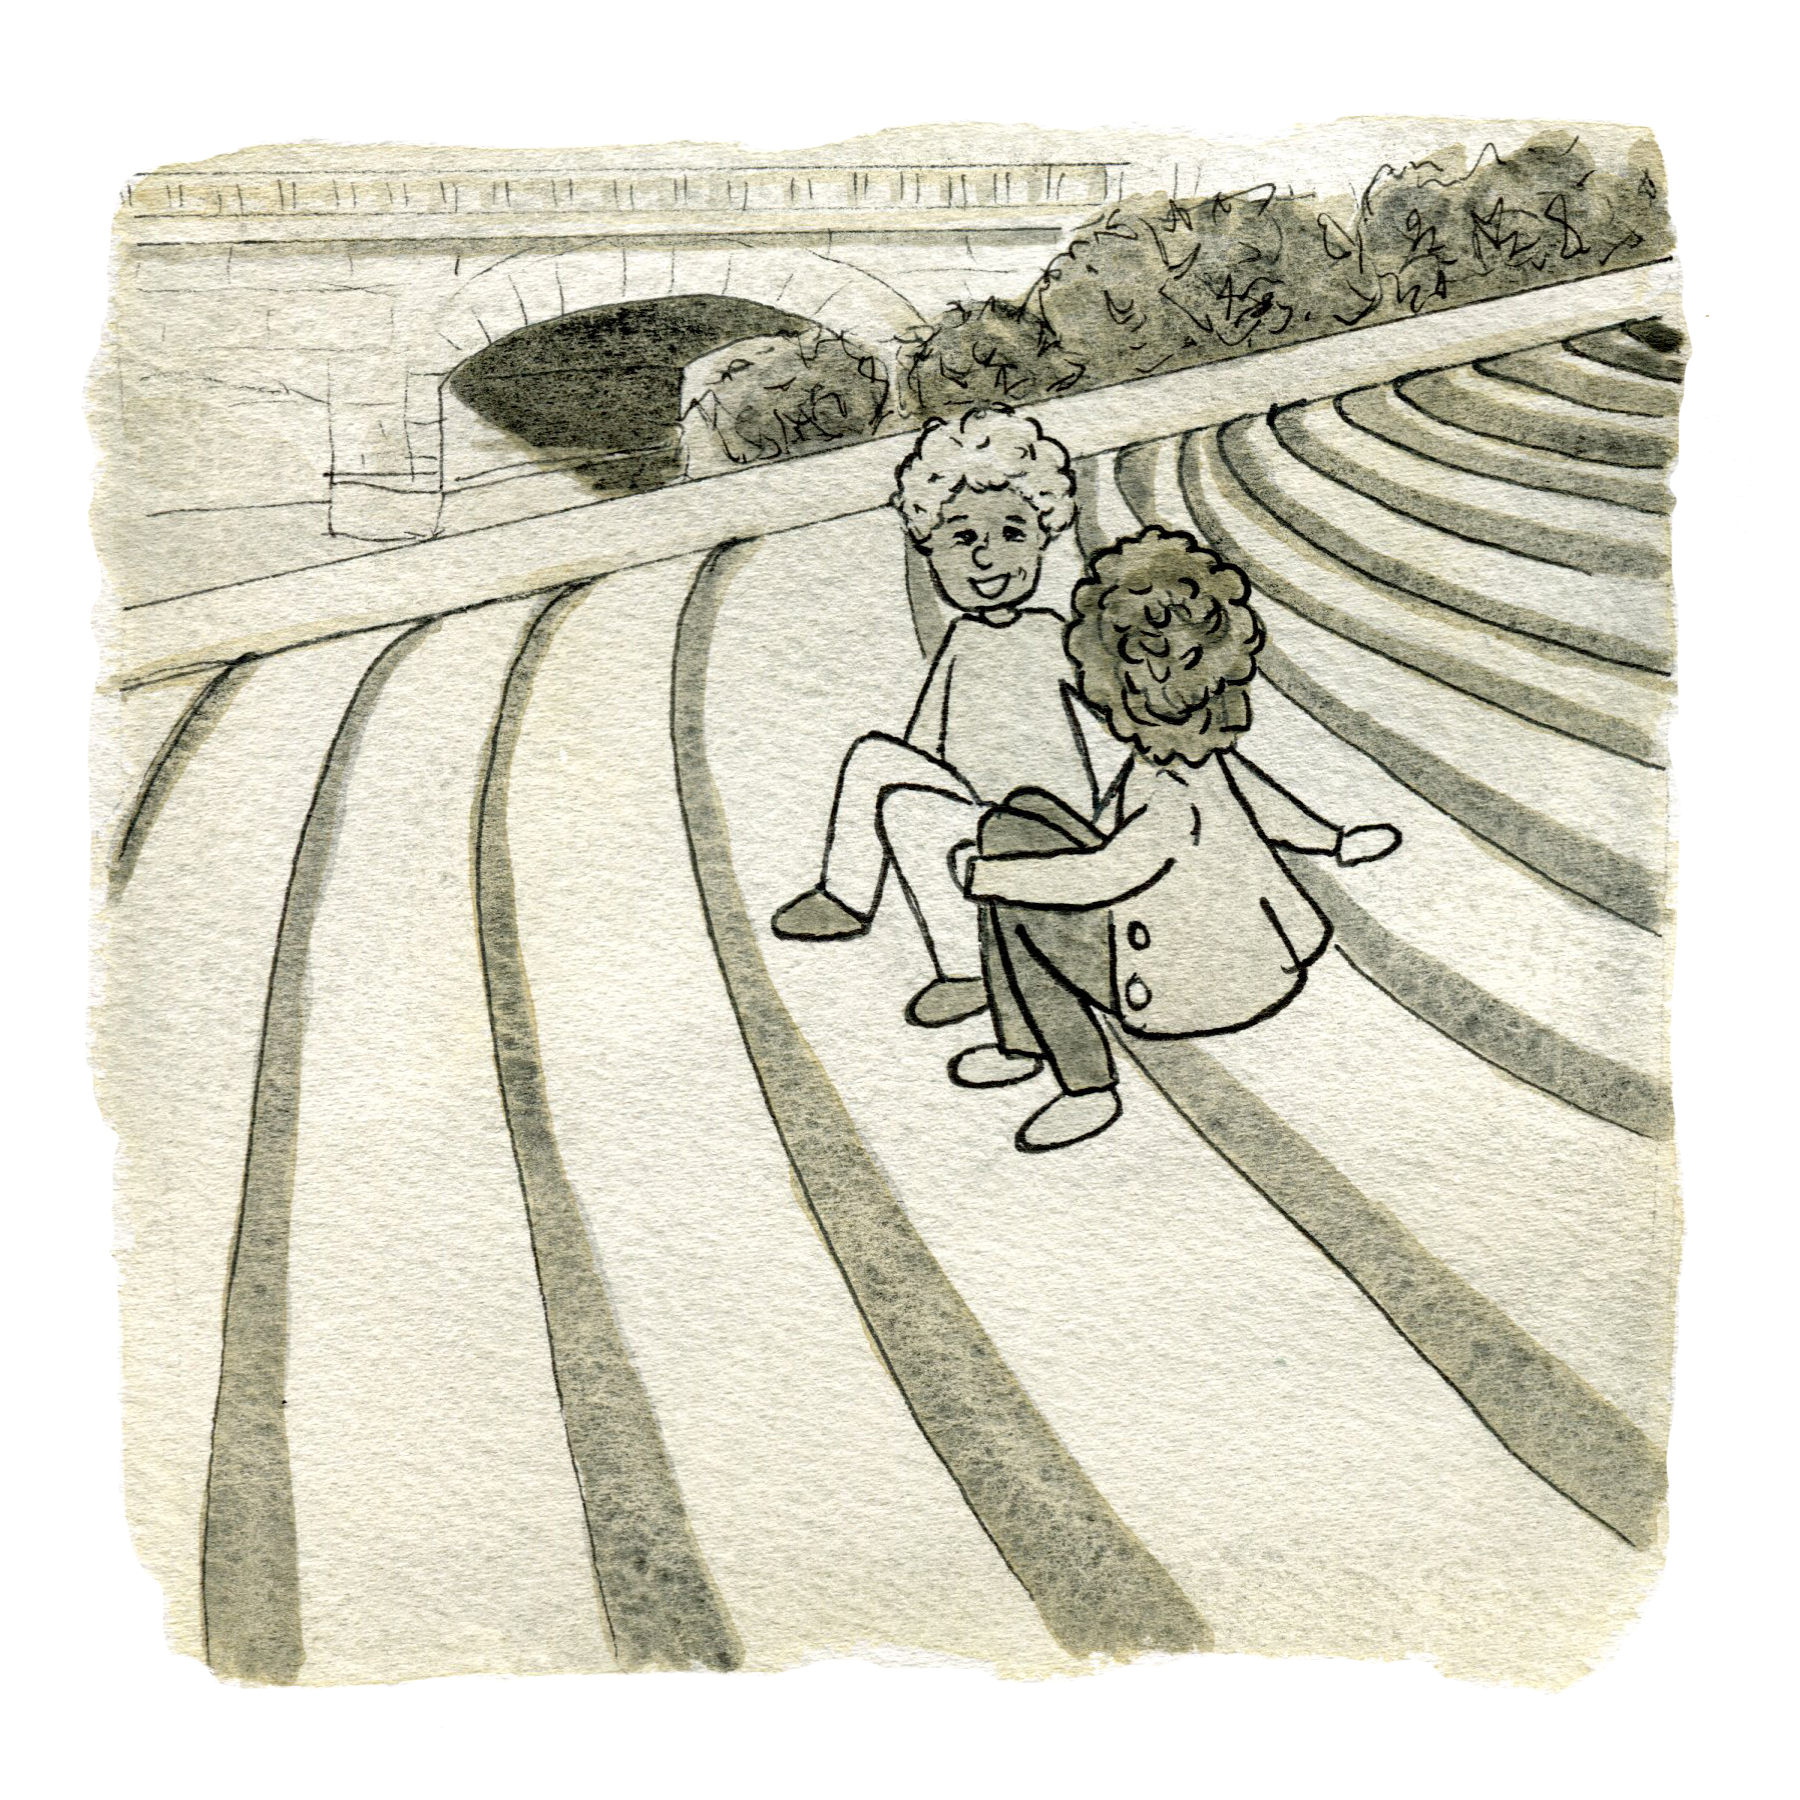 Illustration of two people sitting on steps with a bridge in the background